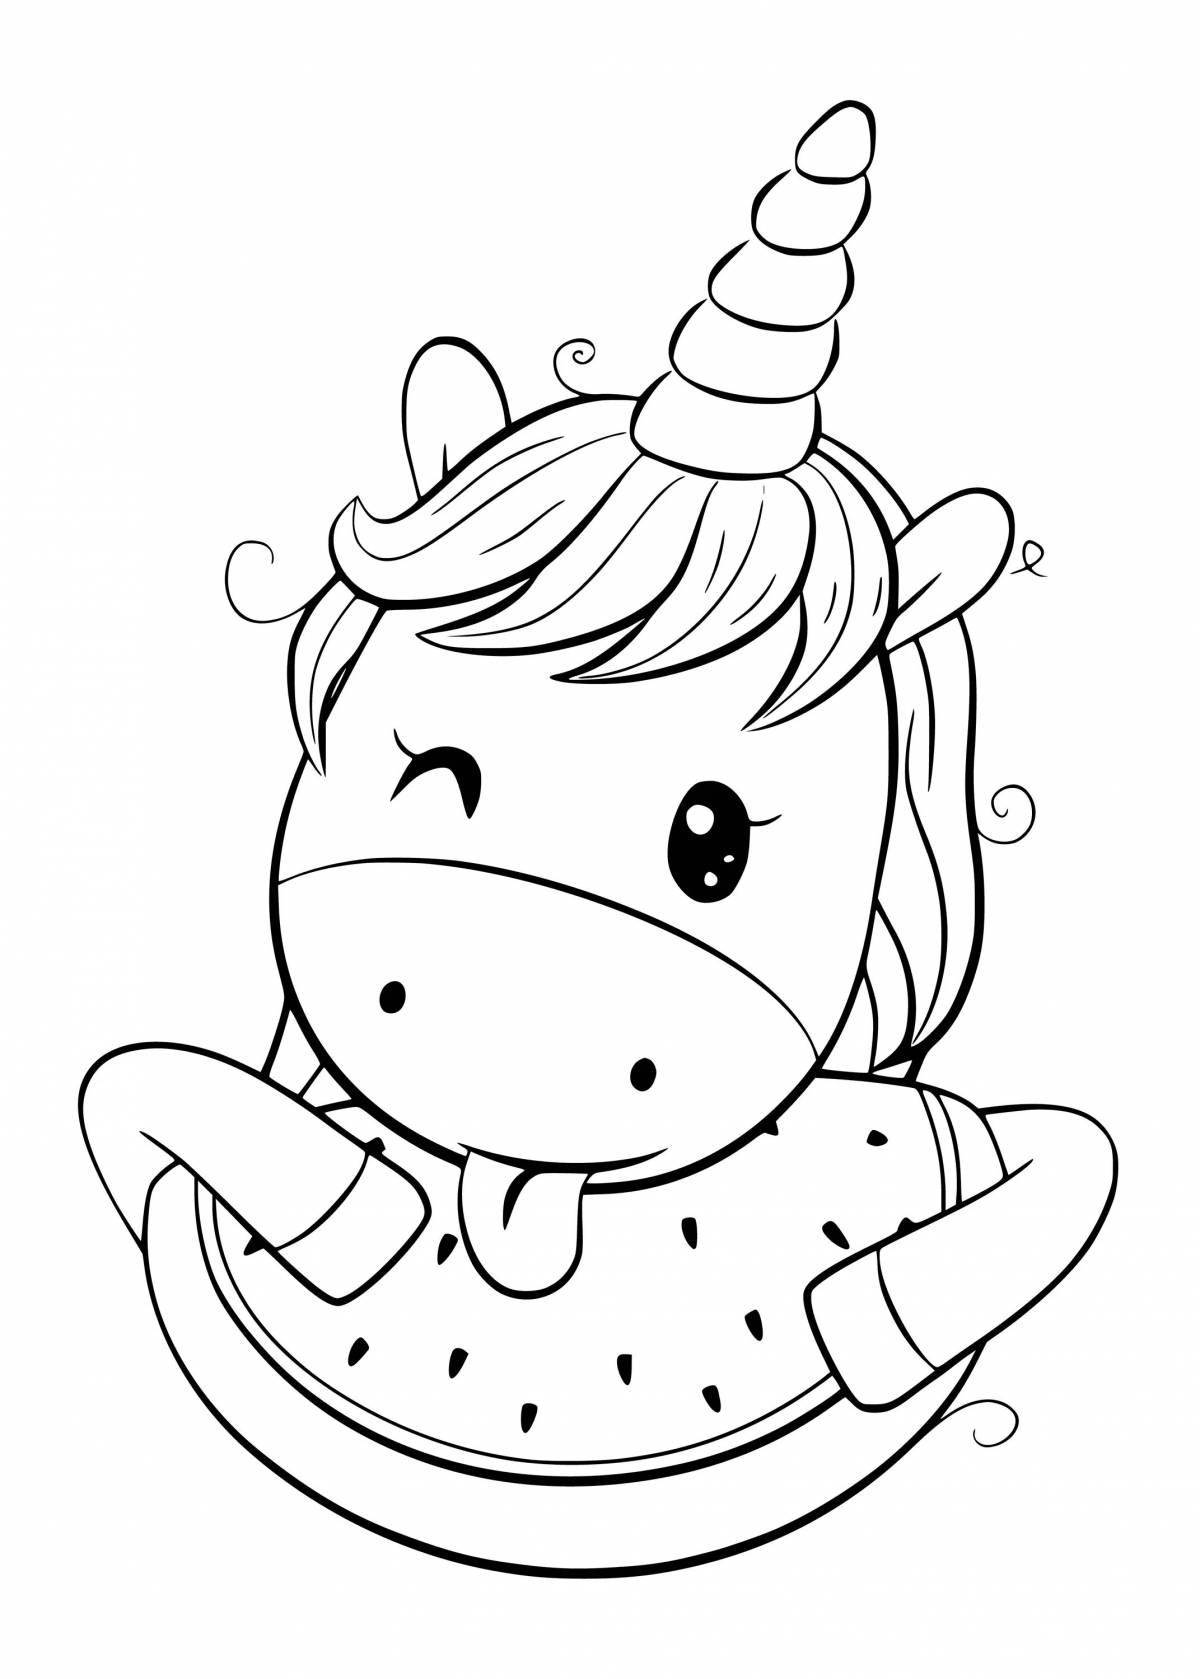 Adorable unicorn coloring book for kids